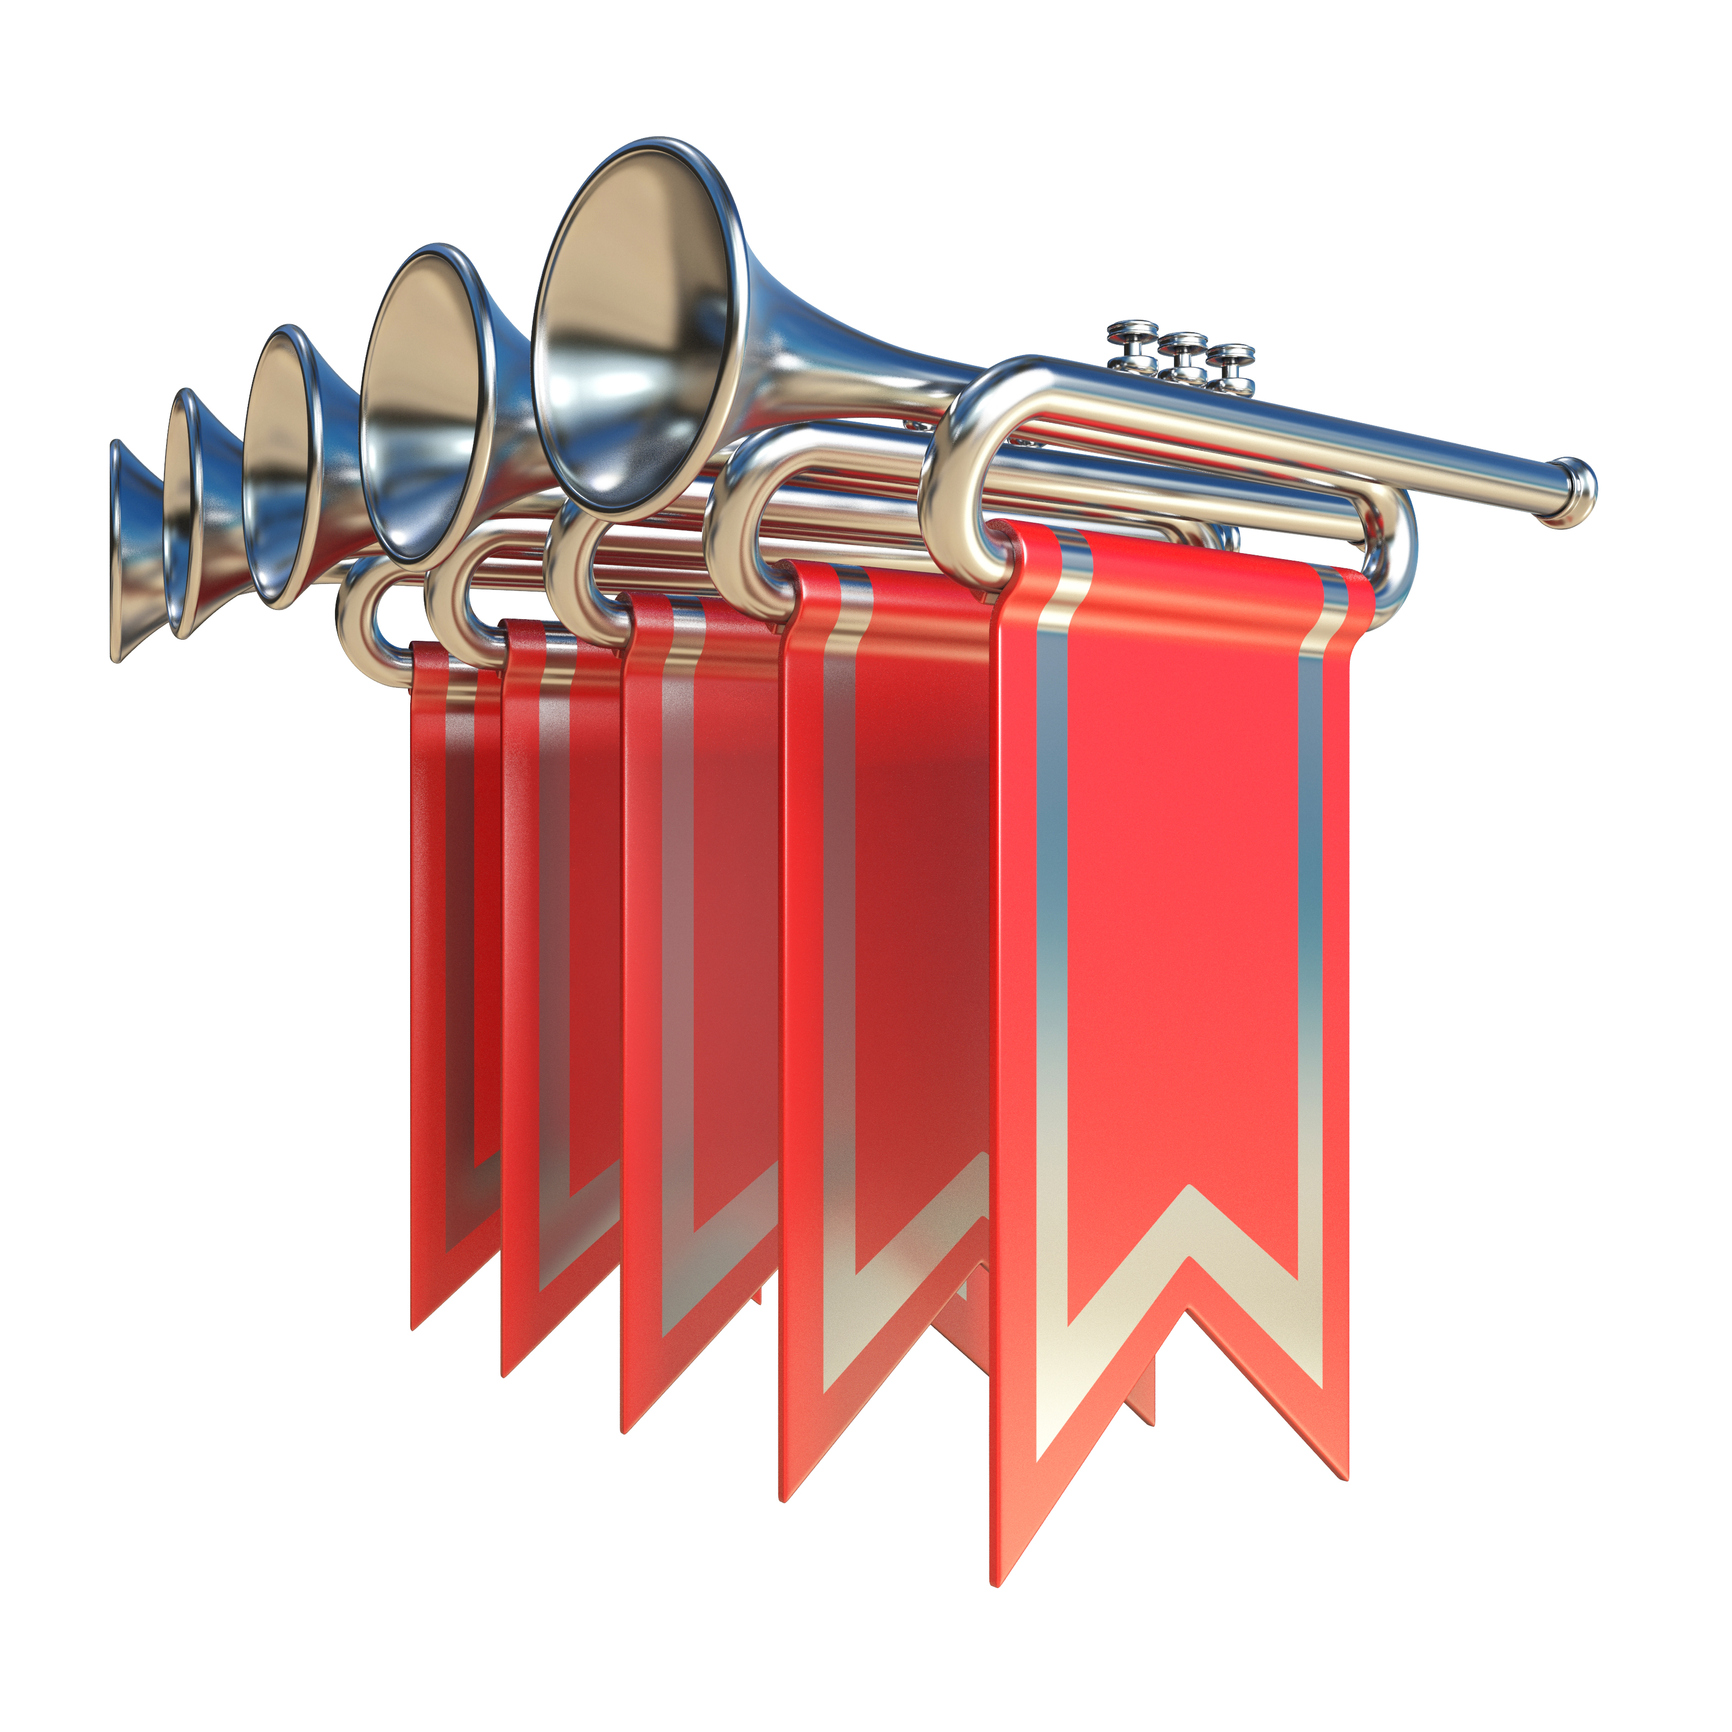 Fanfare five silver trumpets and red flags 3D render illustration isolated on white background